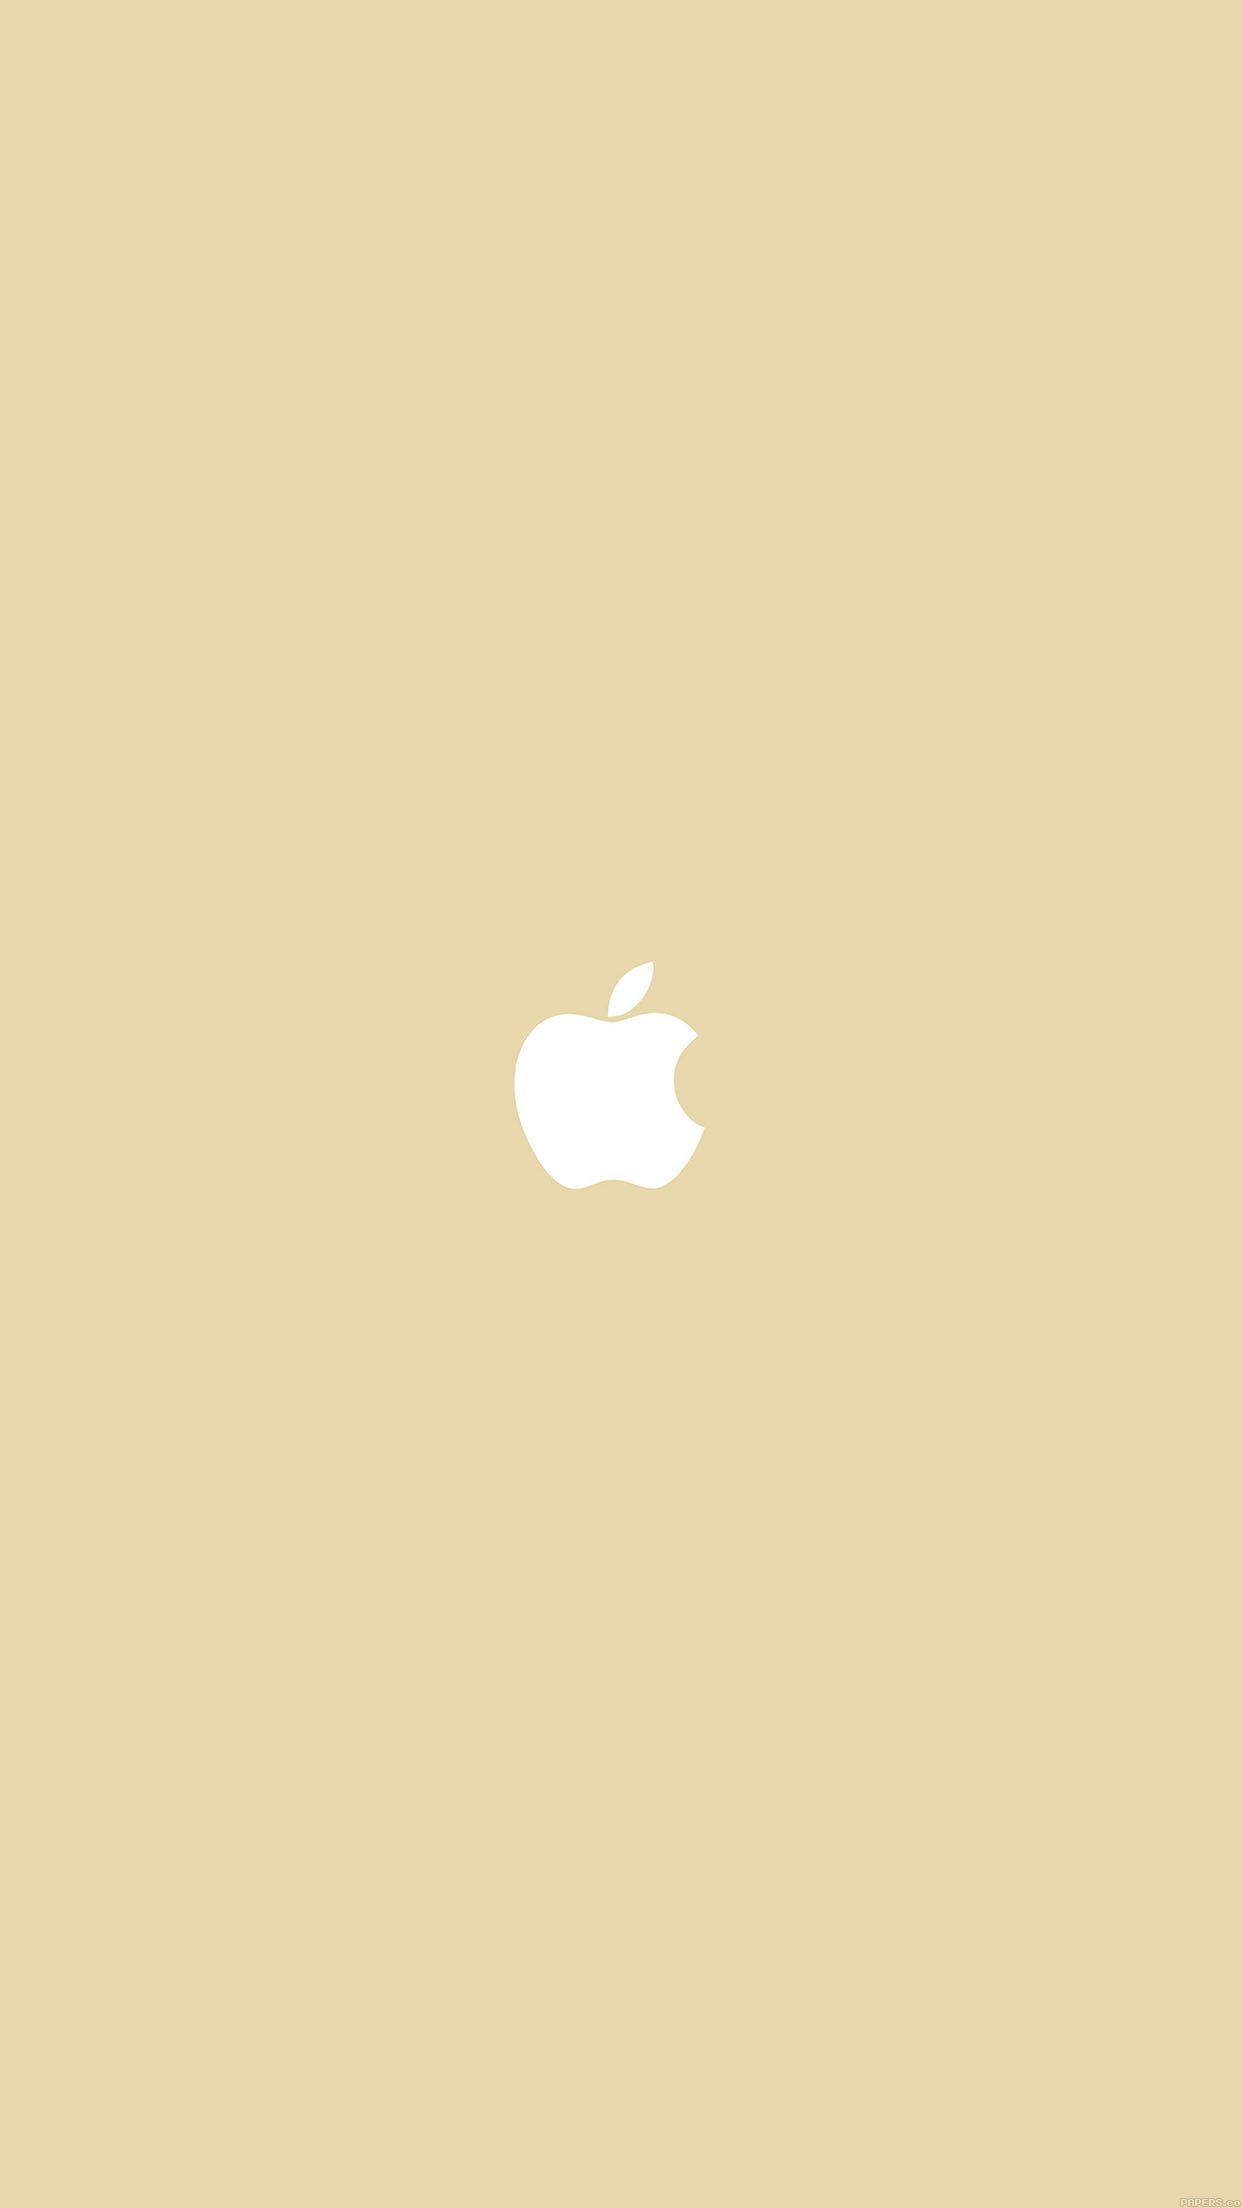 Simple Apple Logo Gold Minimal Android Wallpaper Android Hd Wallpapers